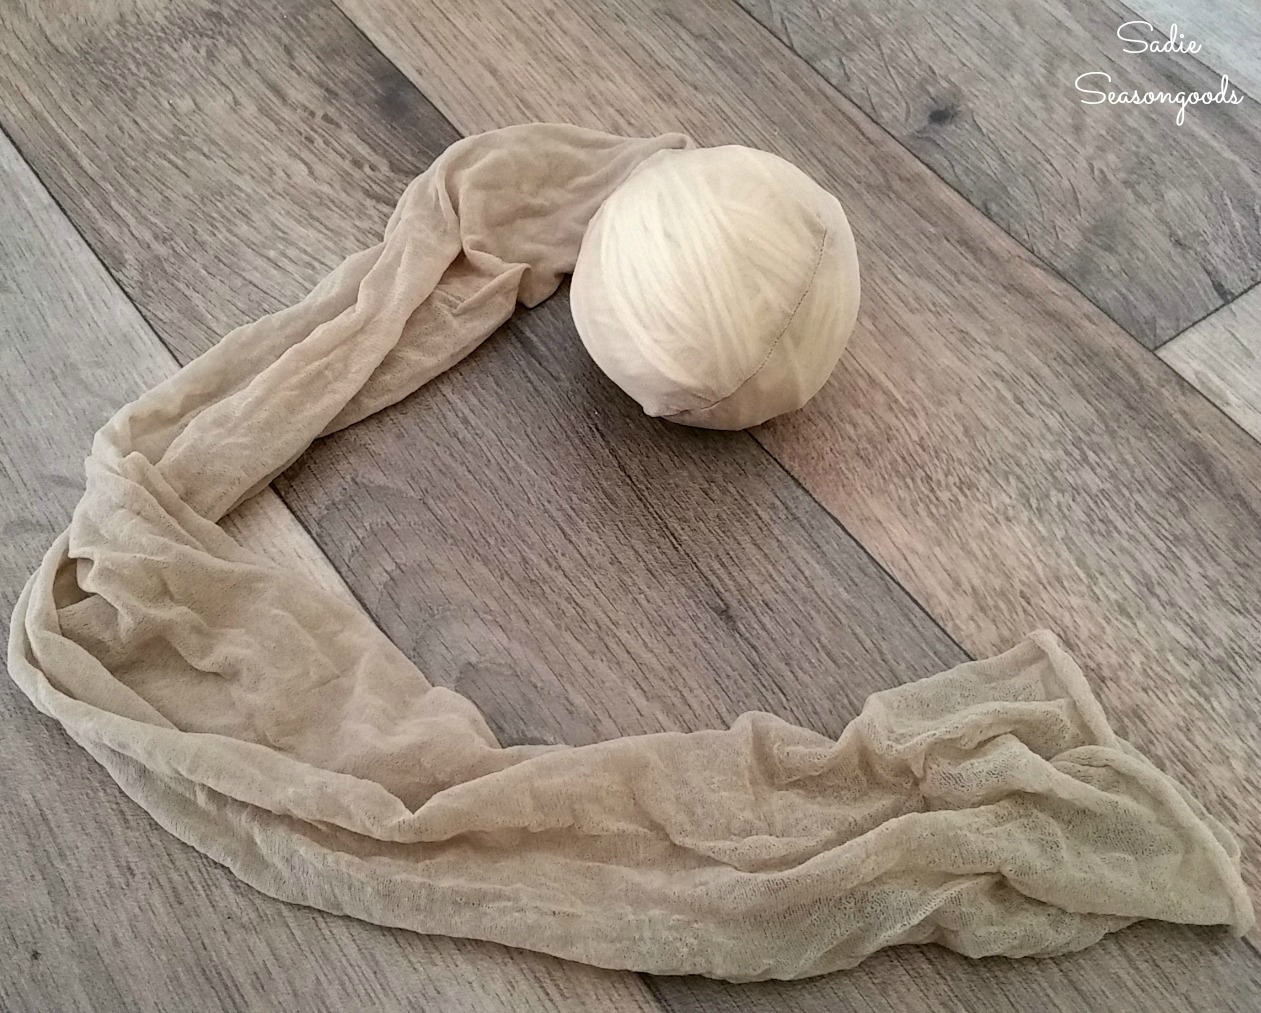 How to felt wool in the washing machine using pantyhose or nylons to create tumble dryer balls by Sadie Seasongoods